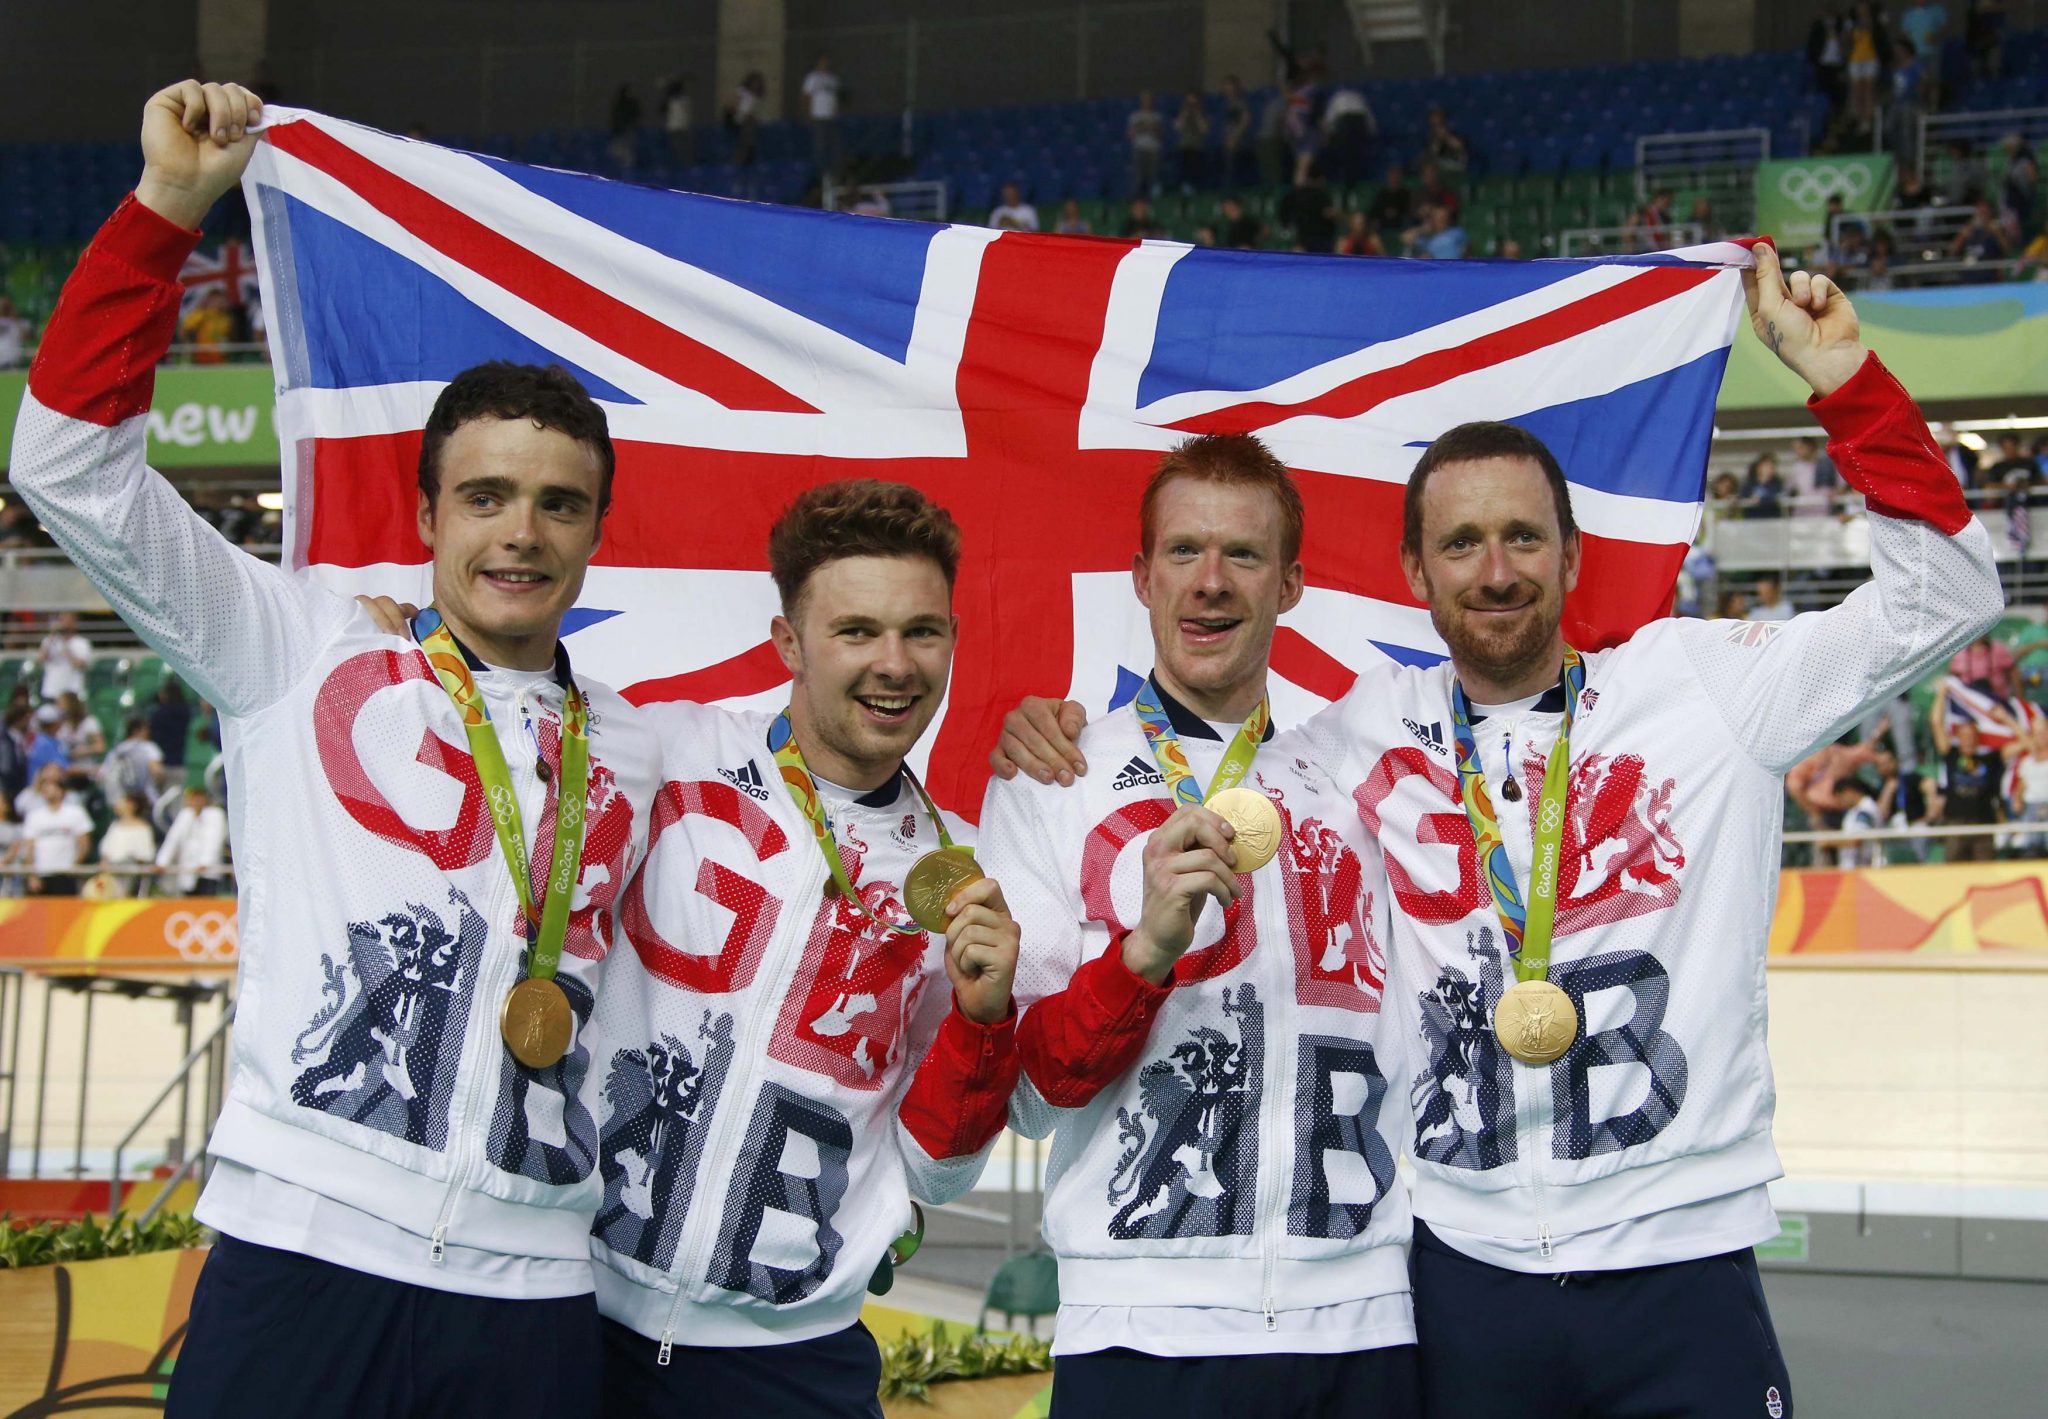 2016 Rio Olympics - Cycling Track - Victory Ceremony - Men's Team Pursuit Victory Ceremony - Rio Olympic Velodrome - Rio de Janeiro, Brazil - 12/08/2016. Steven Burke (GBR) of Britain, Owain Doull (GBR) of Britain, Ed Clancy (GBR) of Britain and Bradley Wiggins (GBR) of Britain pose with the gold medal and their country's flag. REUTERS/Eric Gaillard FOR EDITORIAL USE ONLY. NOT FOR SALE FOR MARKETING OR ADVERTISING CAMPAIGNS.